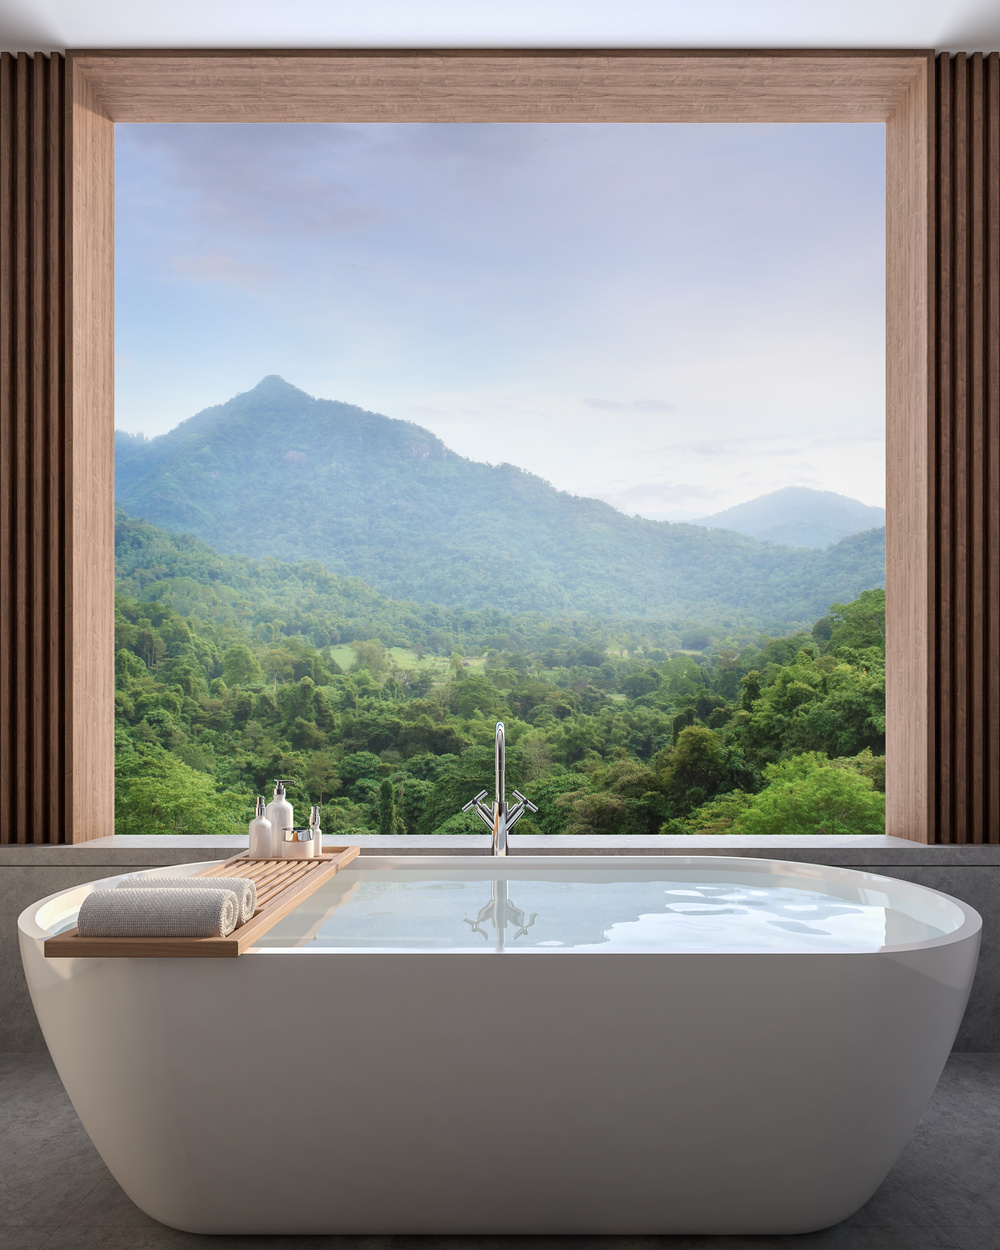 Modern contemporary bathroom with nature view 3d render,There are concrete tile floor decorate wall with wood lattice, There are large open window overlooking to see mountain view.